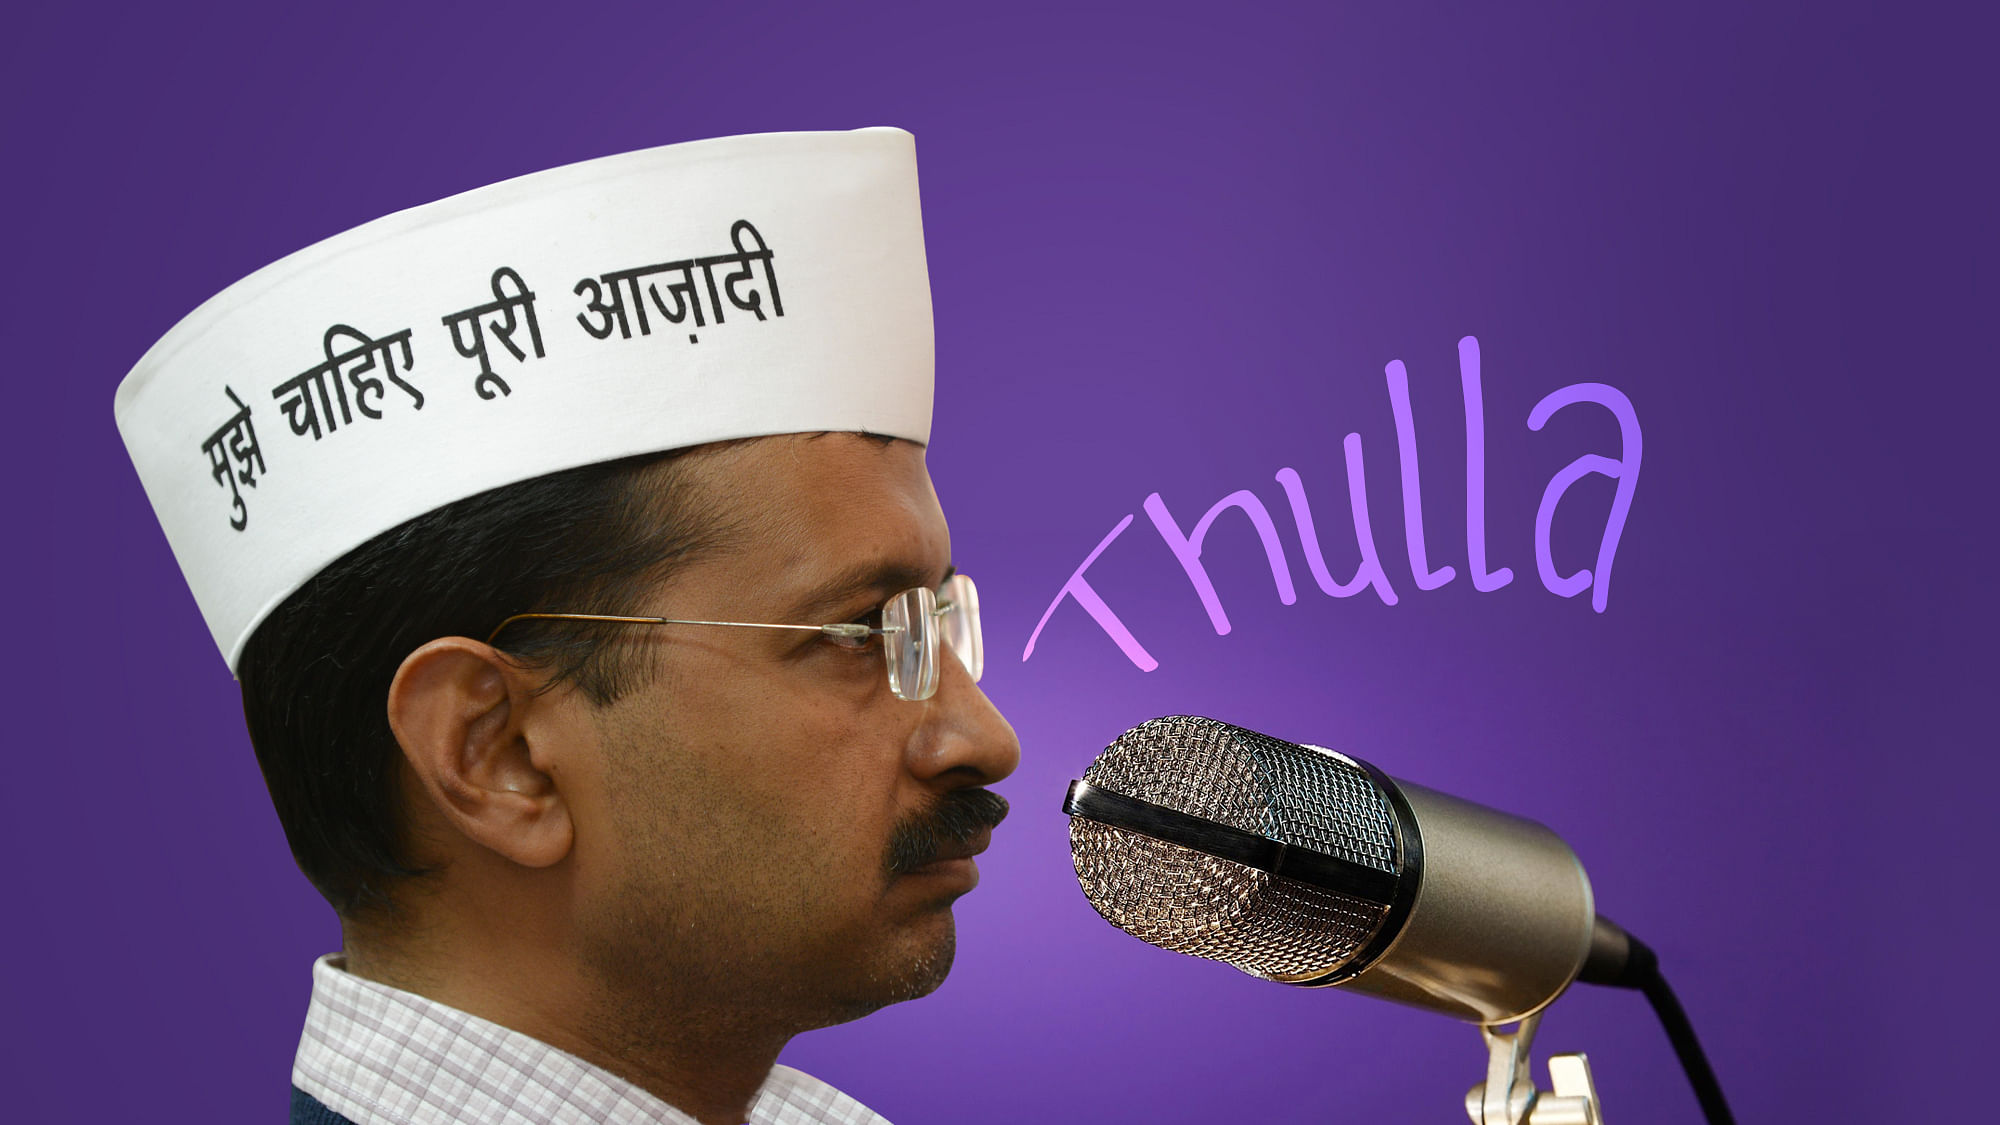 For almost a year now, Delhi Chief Minister Arvind Kejriwal has been dealing with a <i>thulla </i>issue. (Photo: Rahul Gupta<b>/The Quint</b>)